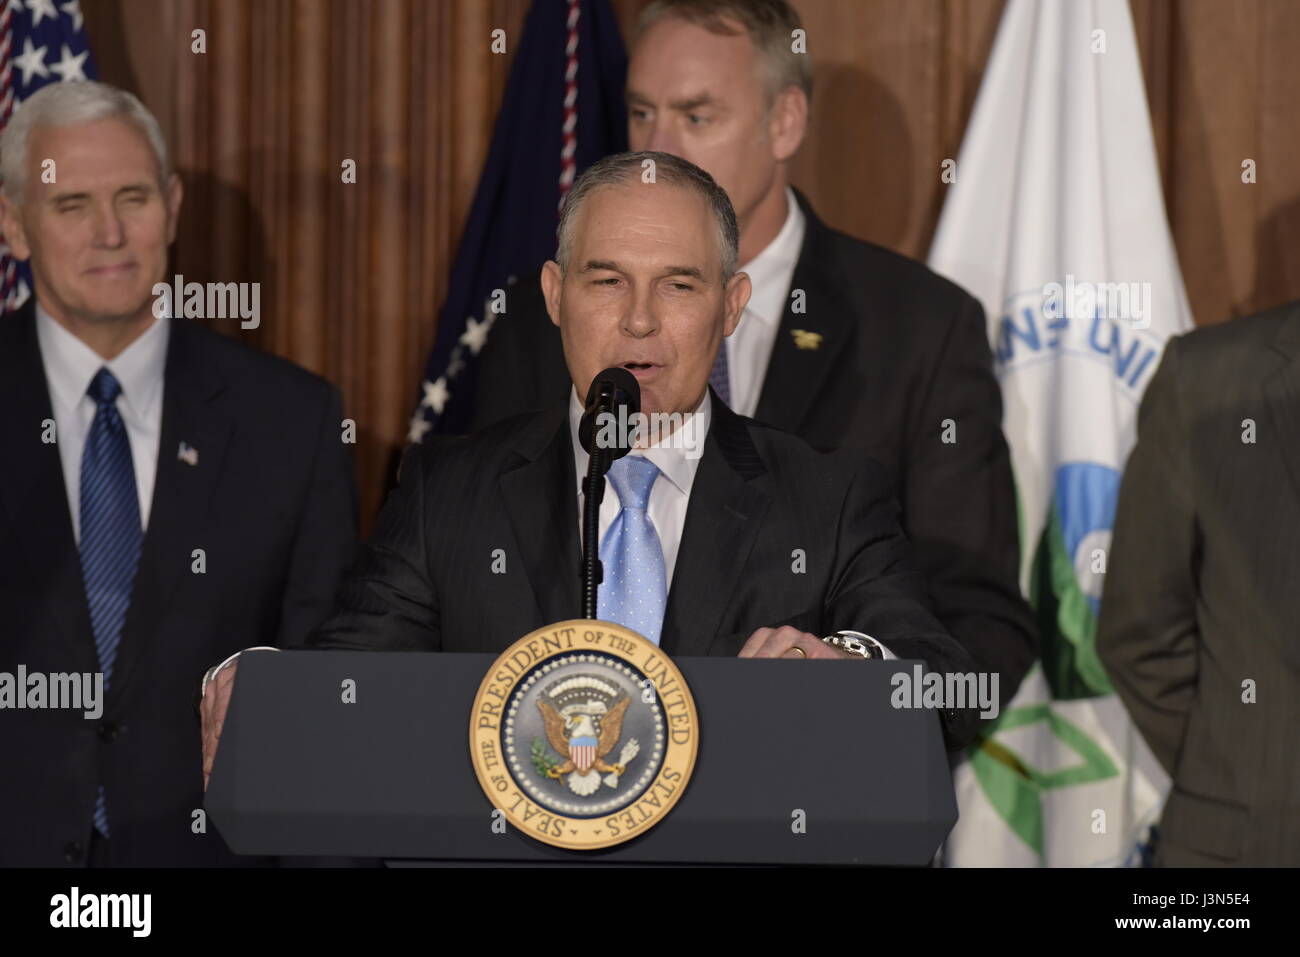 U.S. EPA Administrator Scott Pruitt delivers remarks at a signing ceremony for a series of anti-environmental executive orders aimed at repealing restrictions on coal at the Environmental Protection Agency headquarters March 28, 2017 in Washington, DC. The orders roll back at least 10 major Obama environmental regulations and fulfills a wish list from the fossil fuel industry. Stock Photo